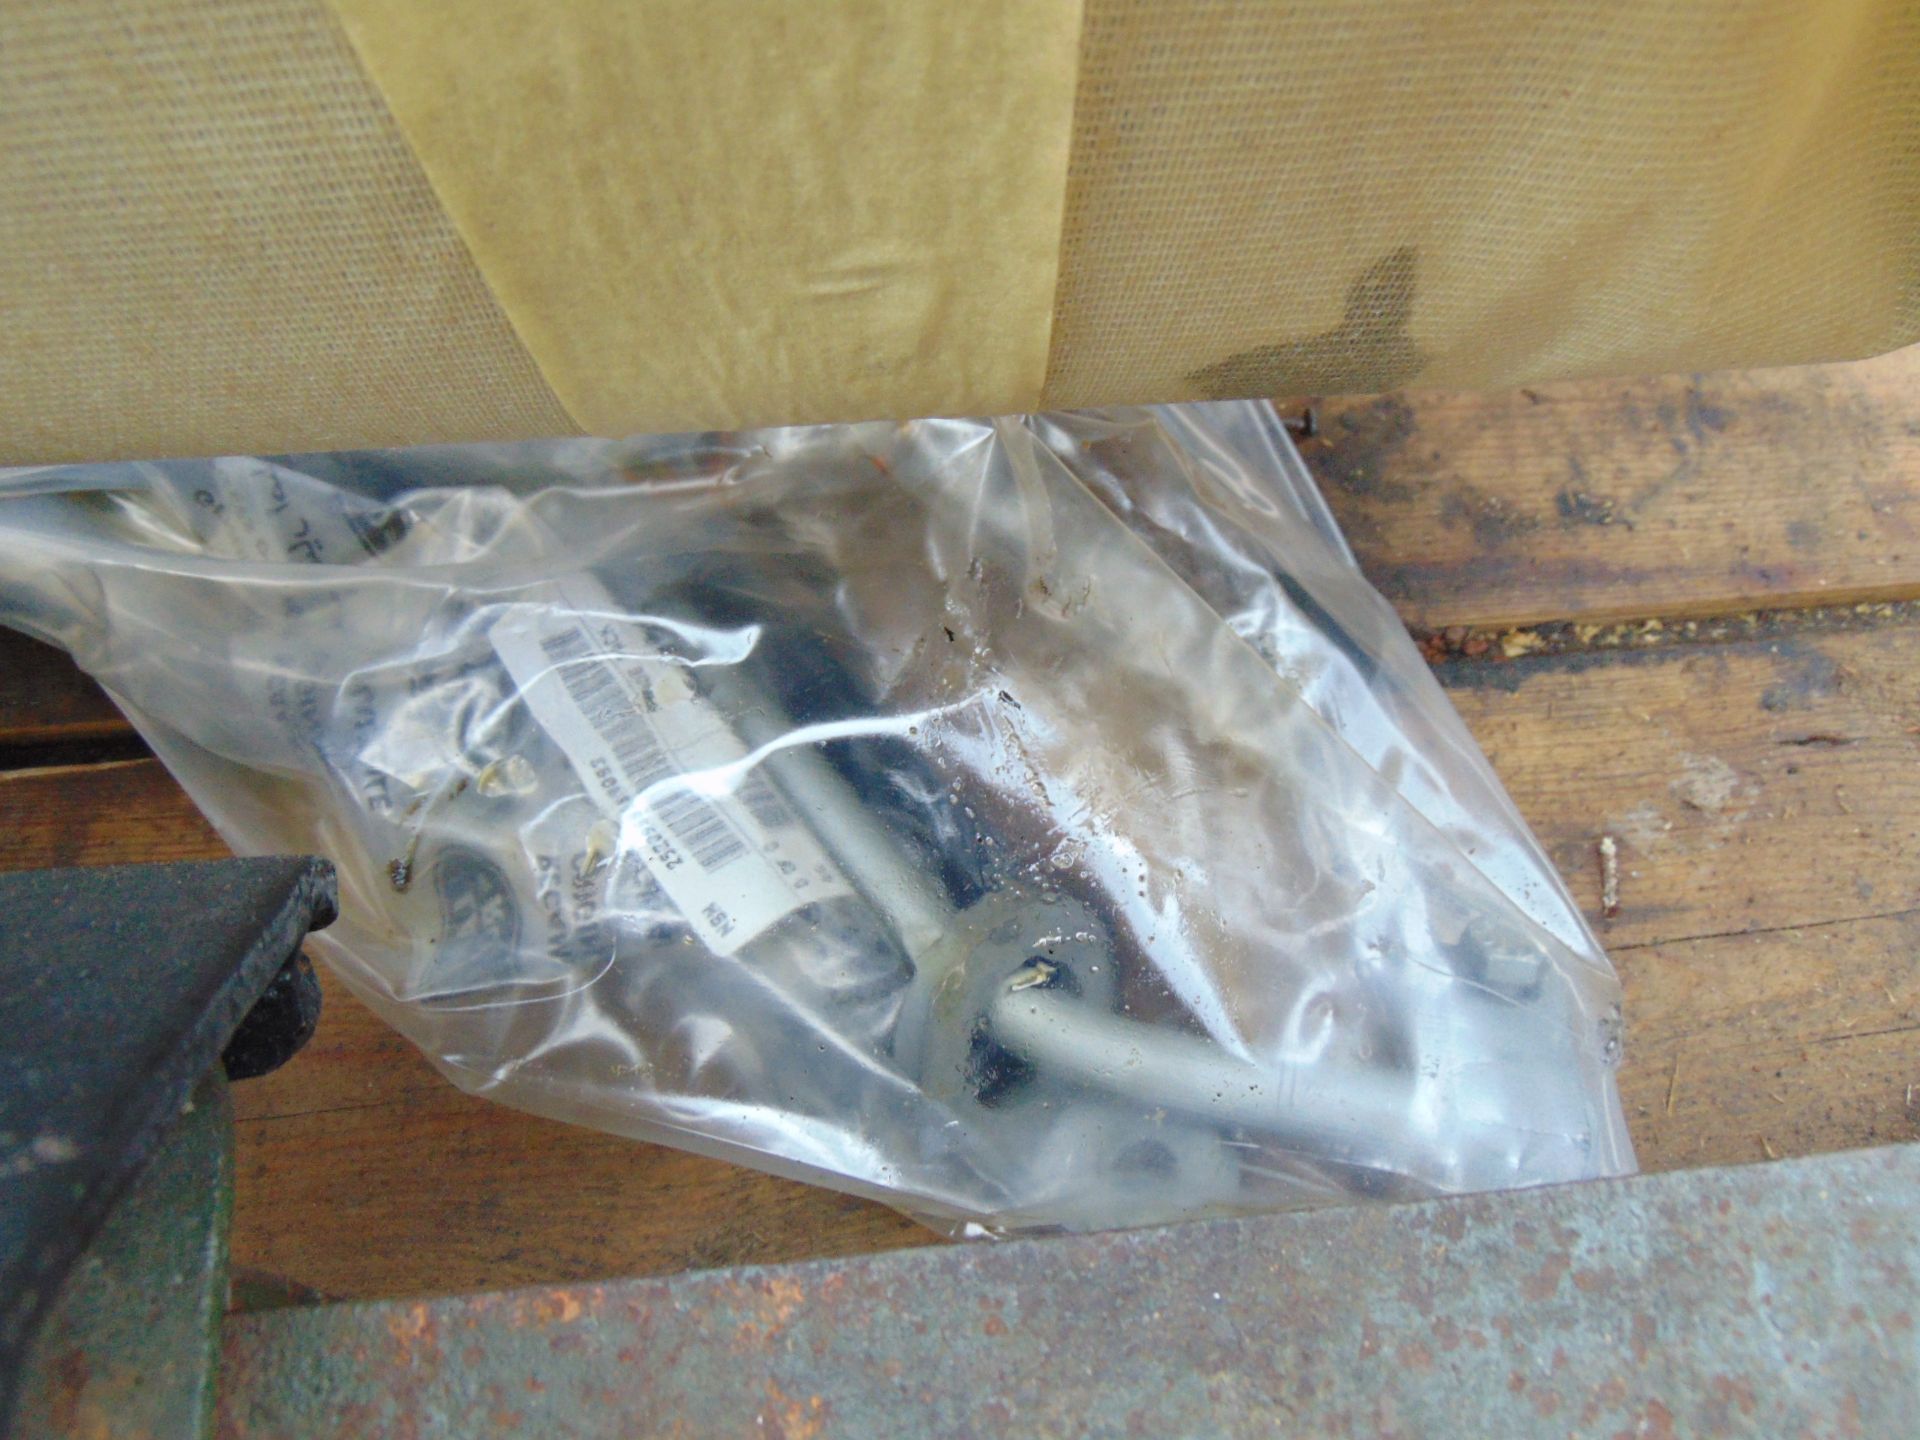 Army Recon Series Gearbox c/w Ancillaries as shown in Original Crate - Image 4 of 20